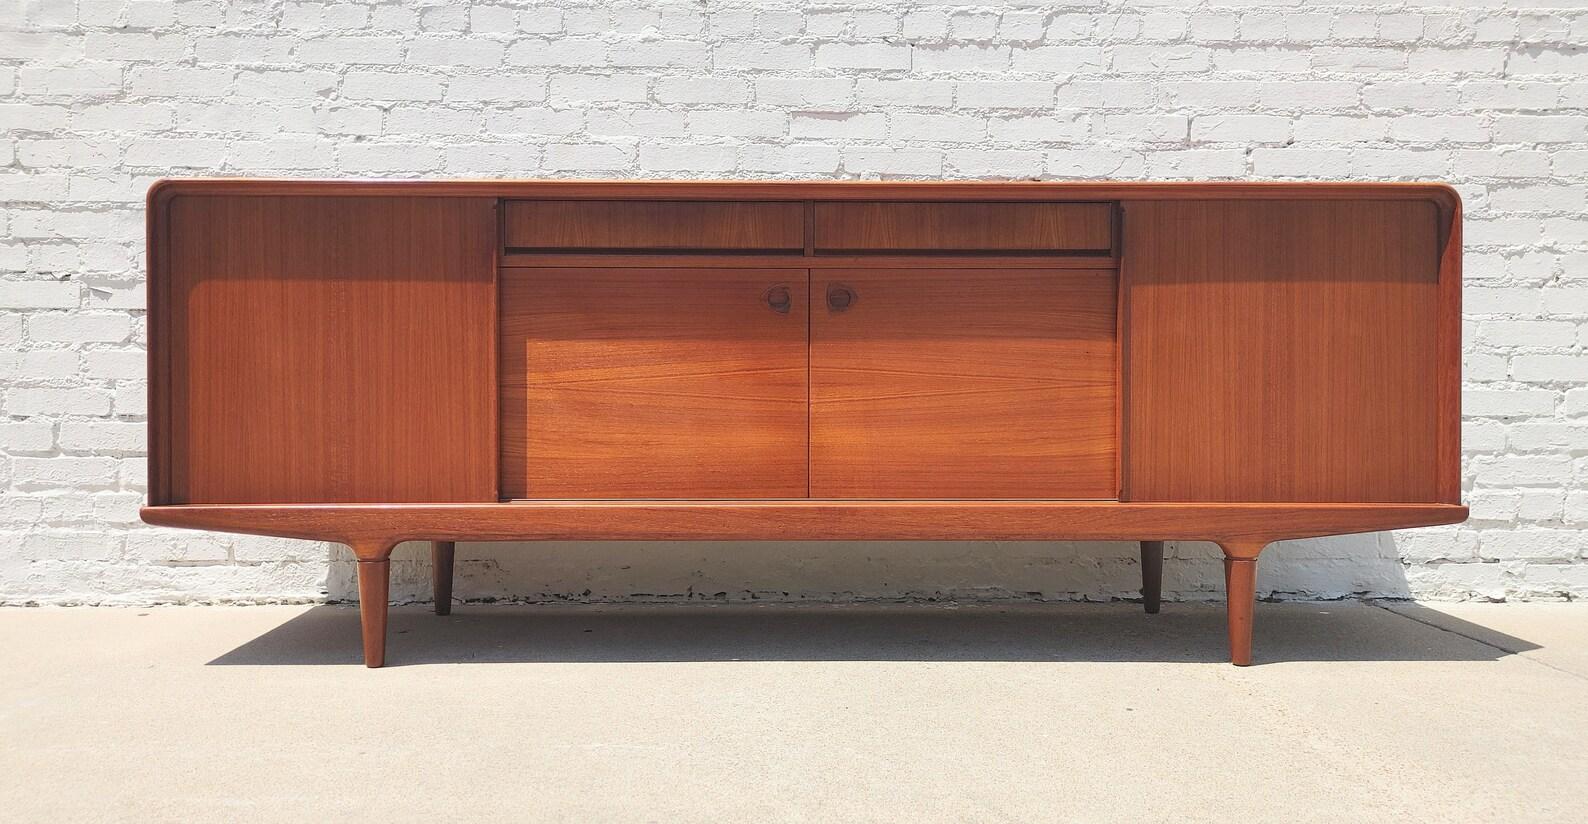 Mid Century Danish Modern Teak Sideboard by Clausen & Sons
 
Above average vintage condition and structurally sound. Has some expected slight finish wear and scratching. Beautifully crafted. Outdoor listing pictures might appear slightly darker or